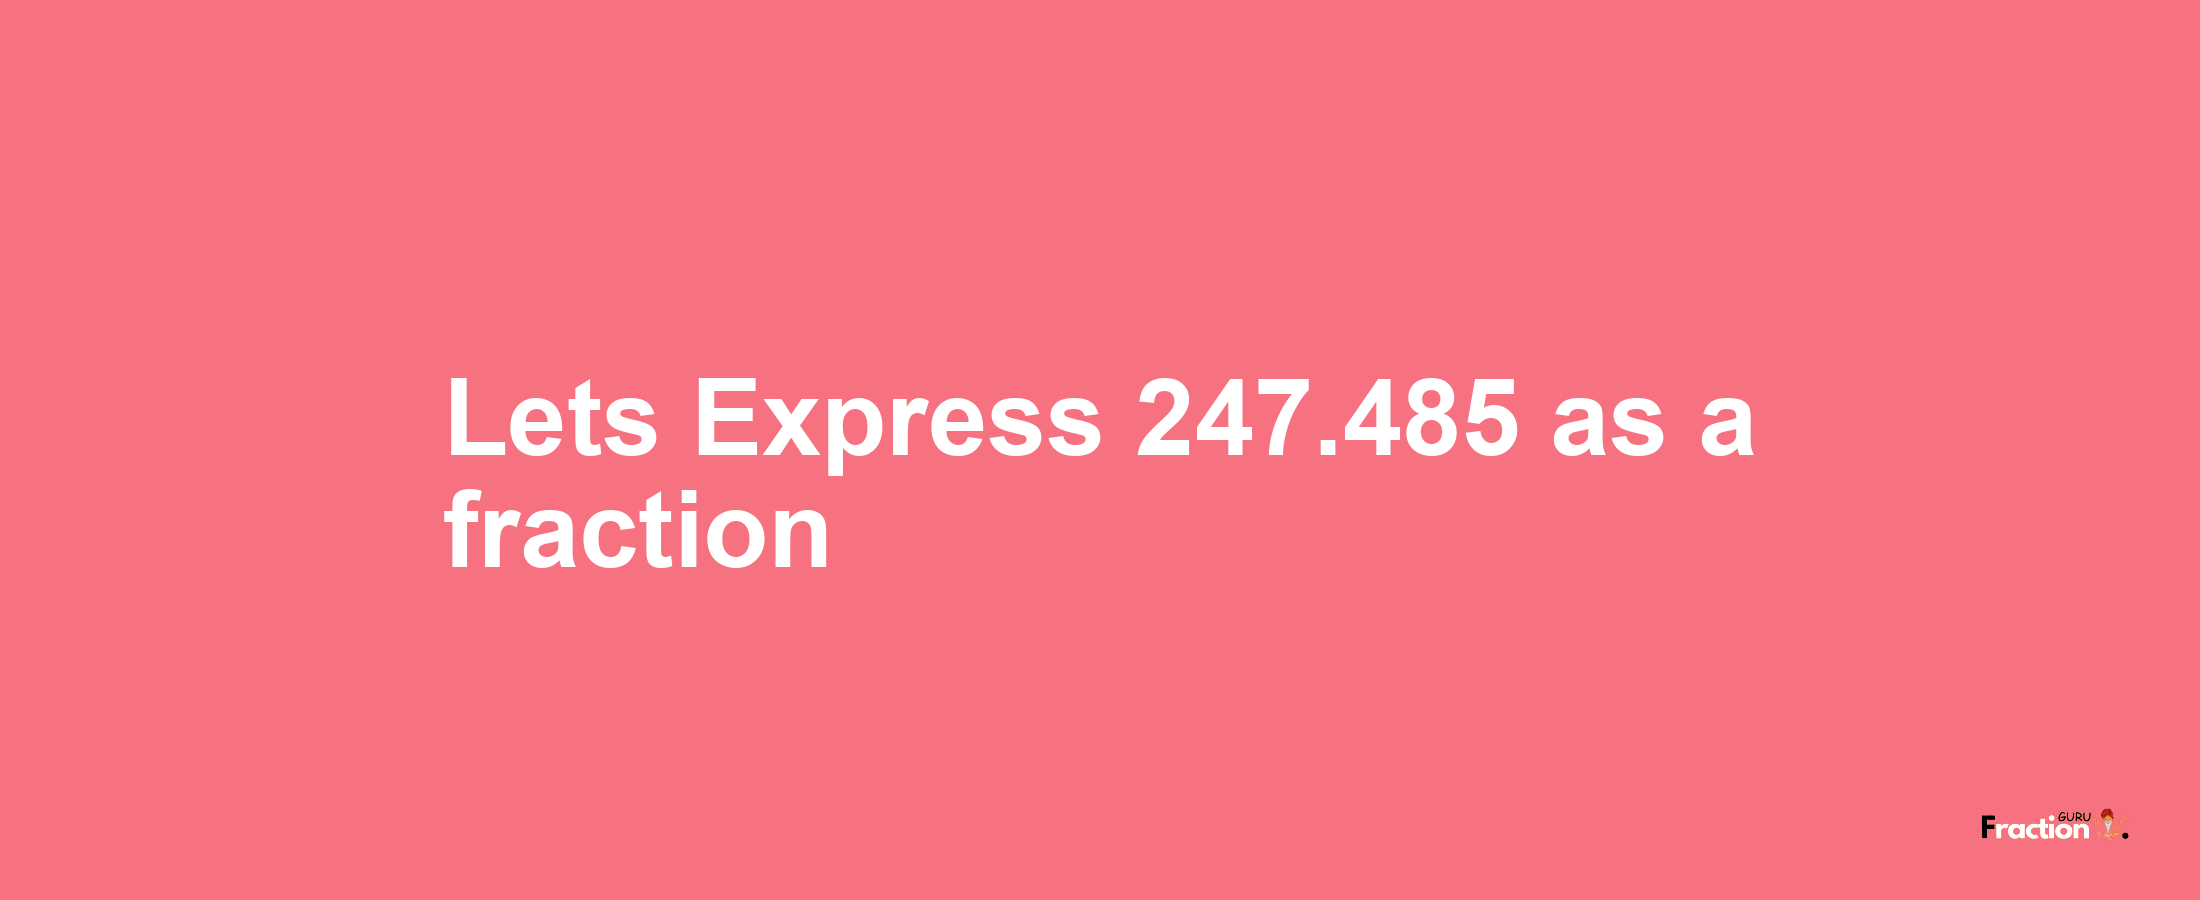 Lets Express 247.485 as afraction